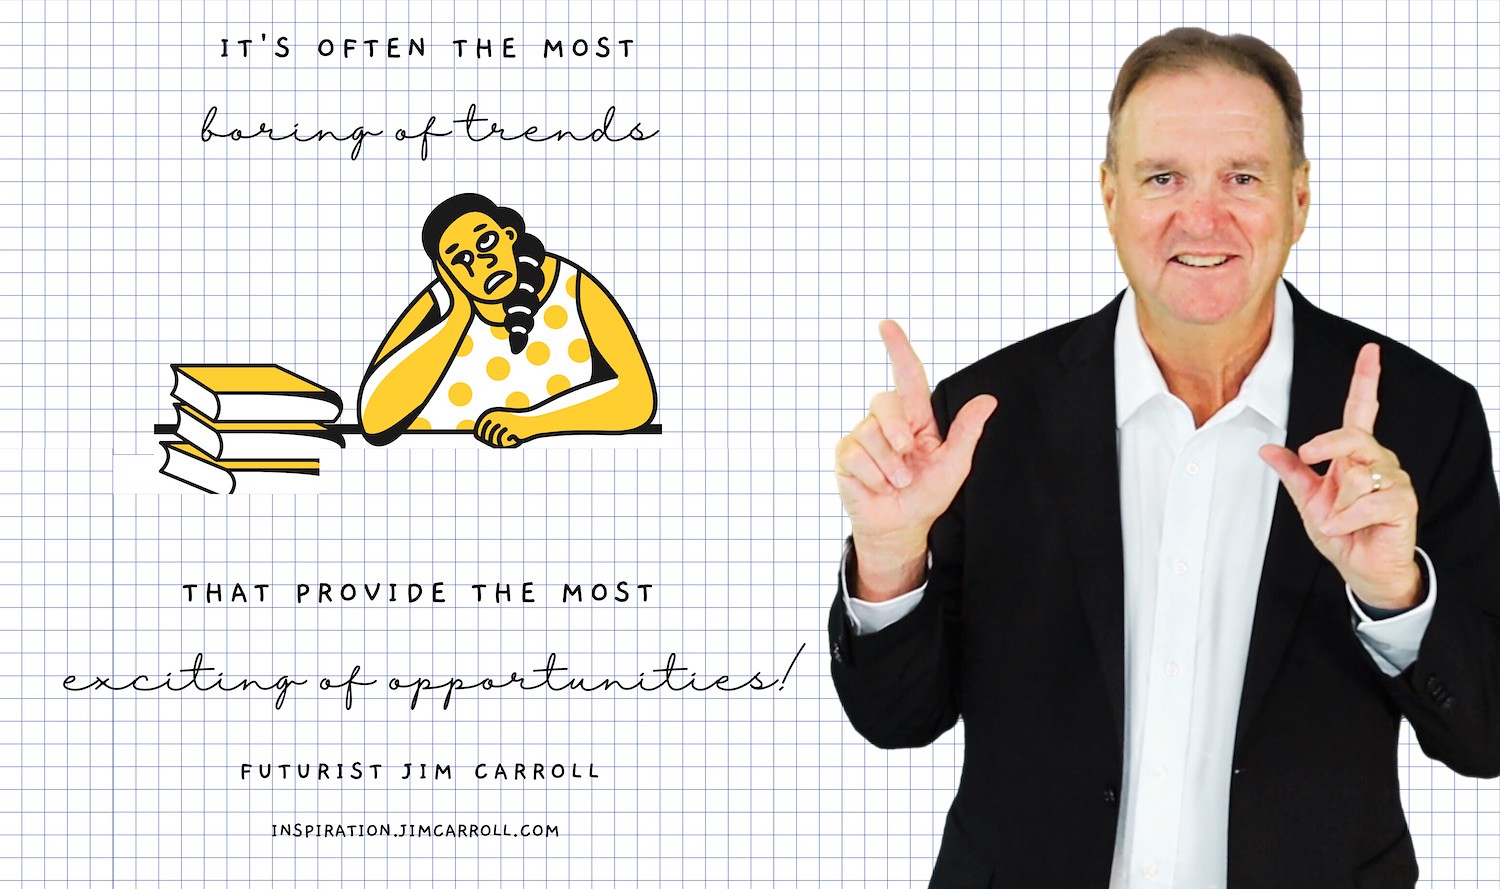 "It's often the most boring of trends that provide the most exciting of opportunities!" - Futurist Jim Carroll